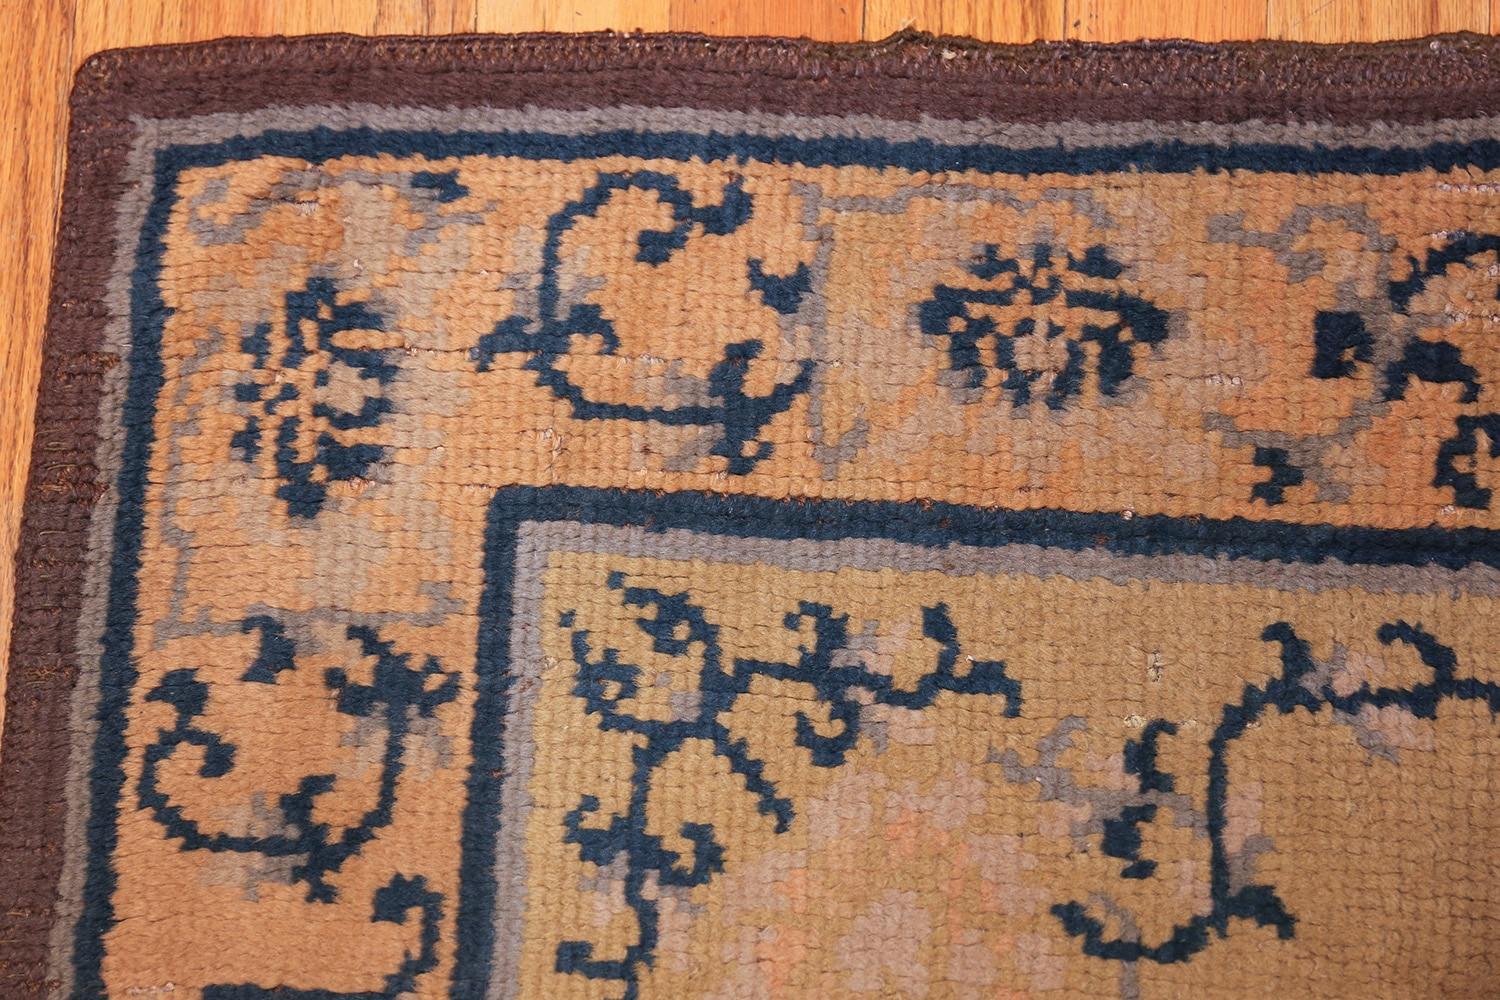 Hand-Knotted Square Size Antique Spanish Carpet. Size: 4 ft 5 in x 4 ft 11 in